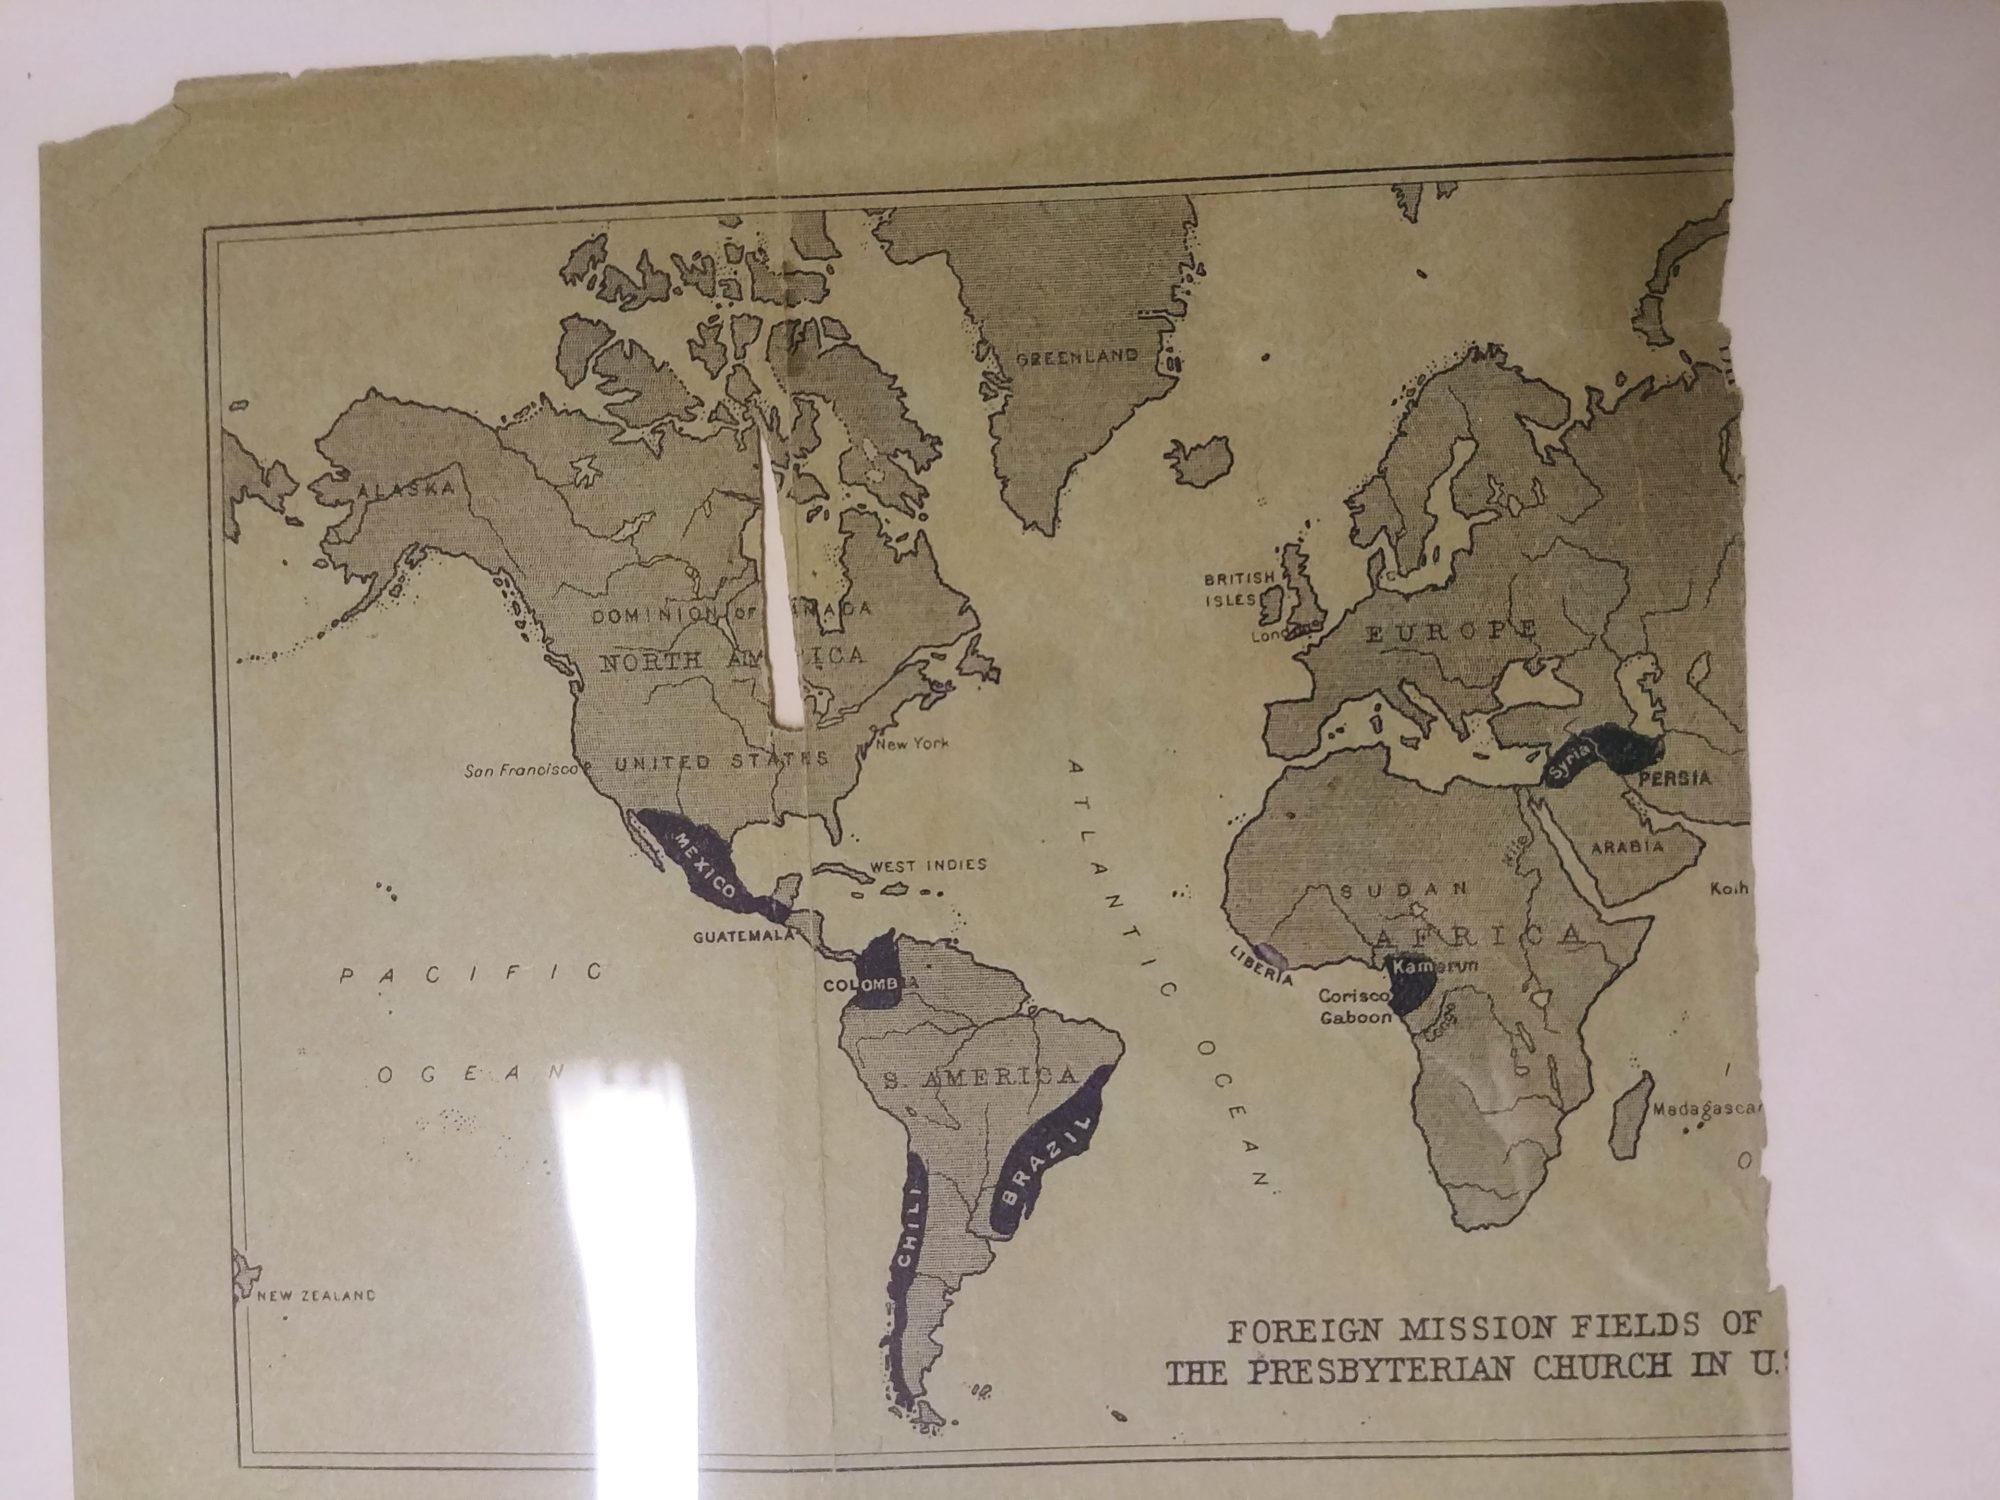 image early 20th century map of Presbyterian Mission Fields around the world